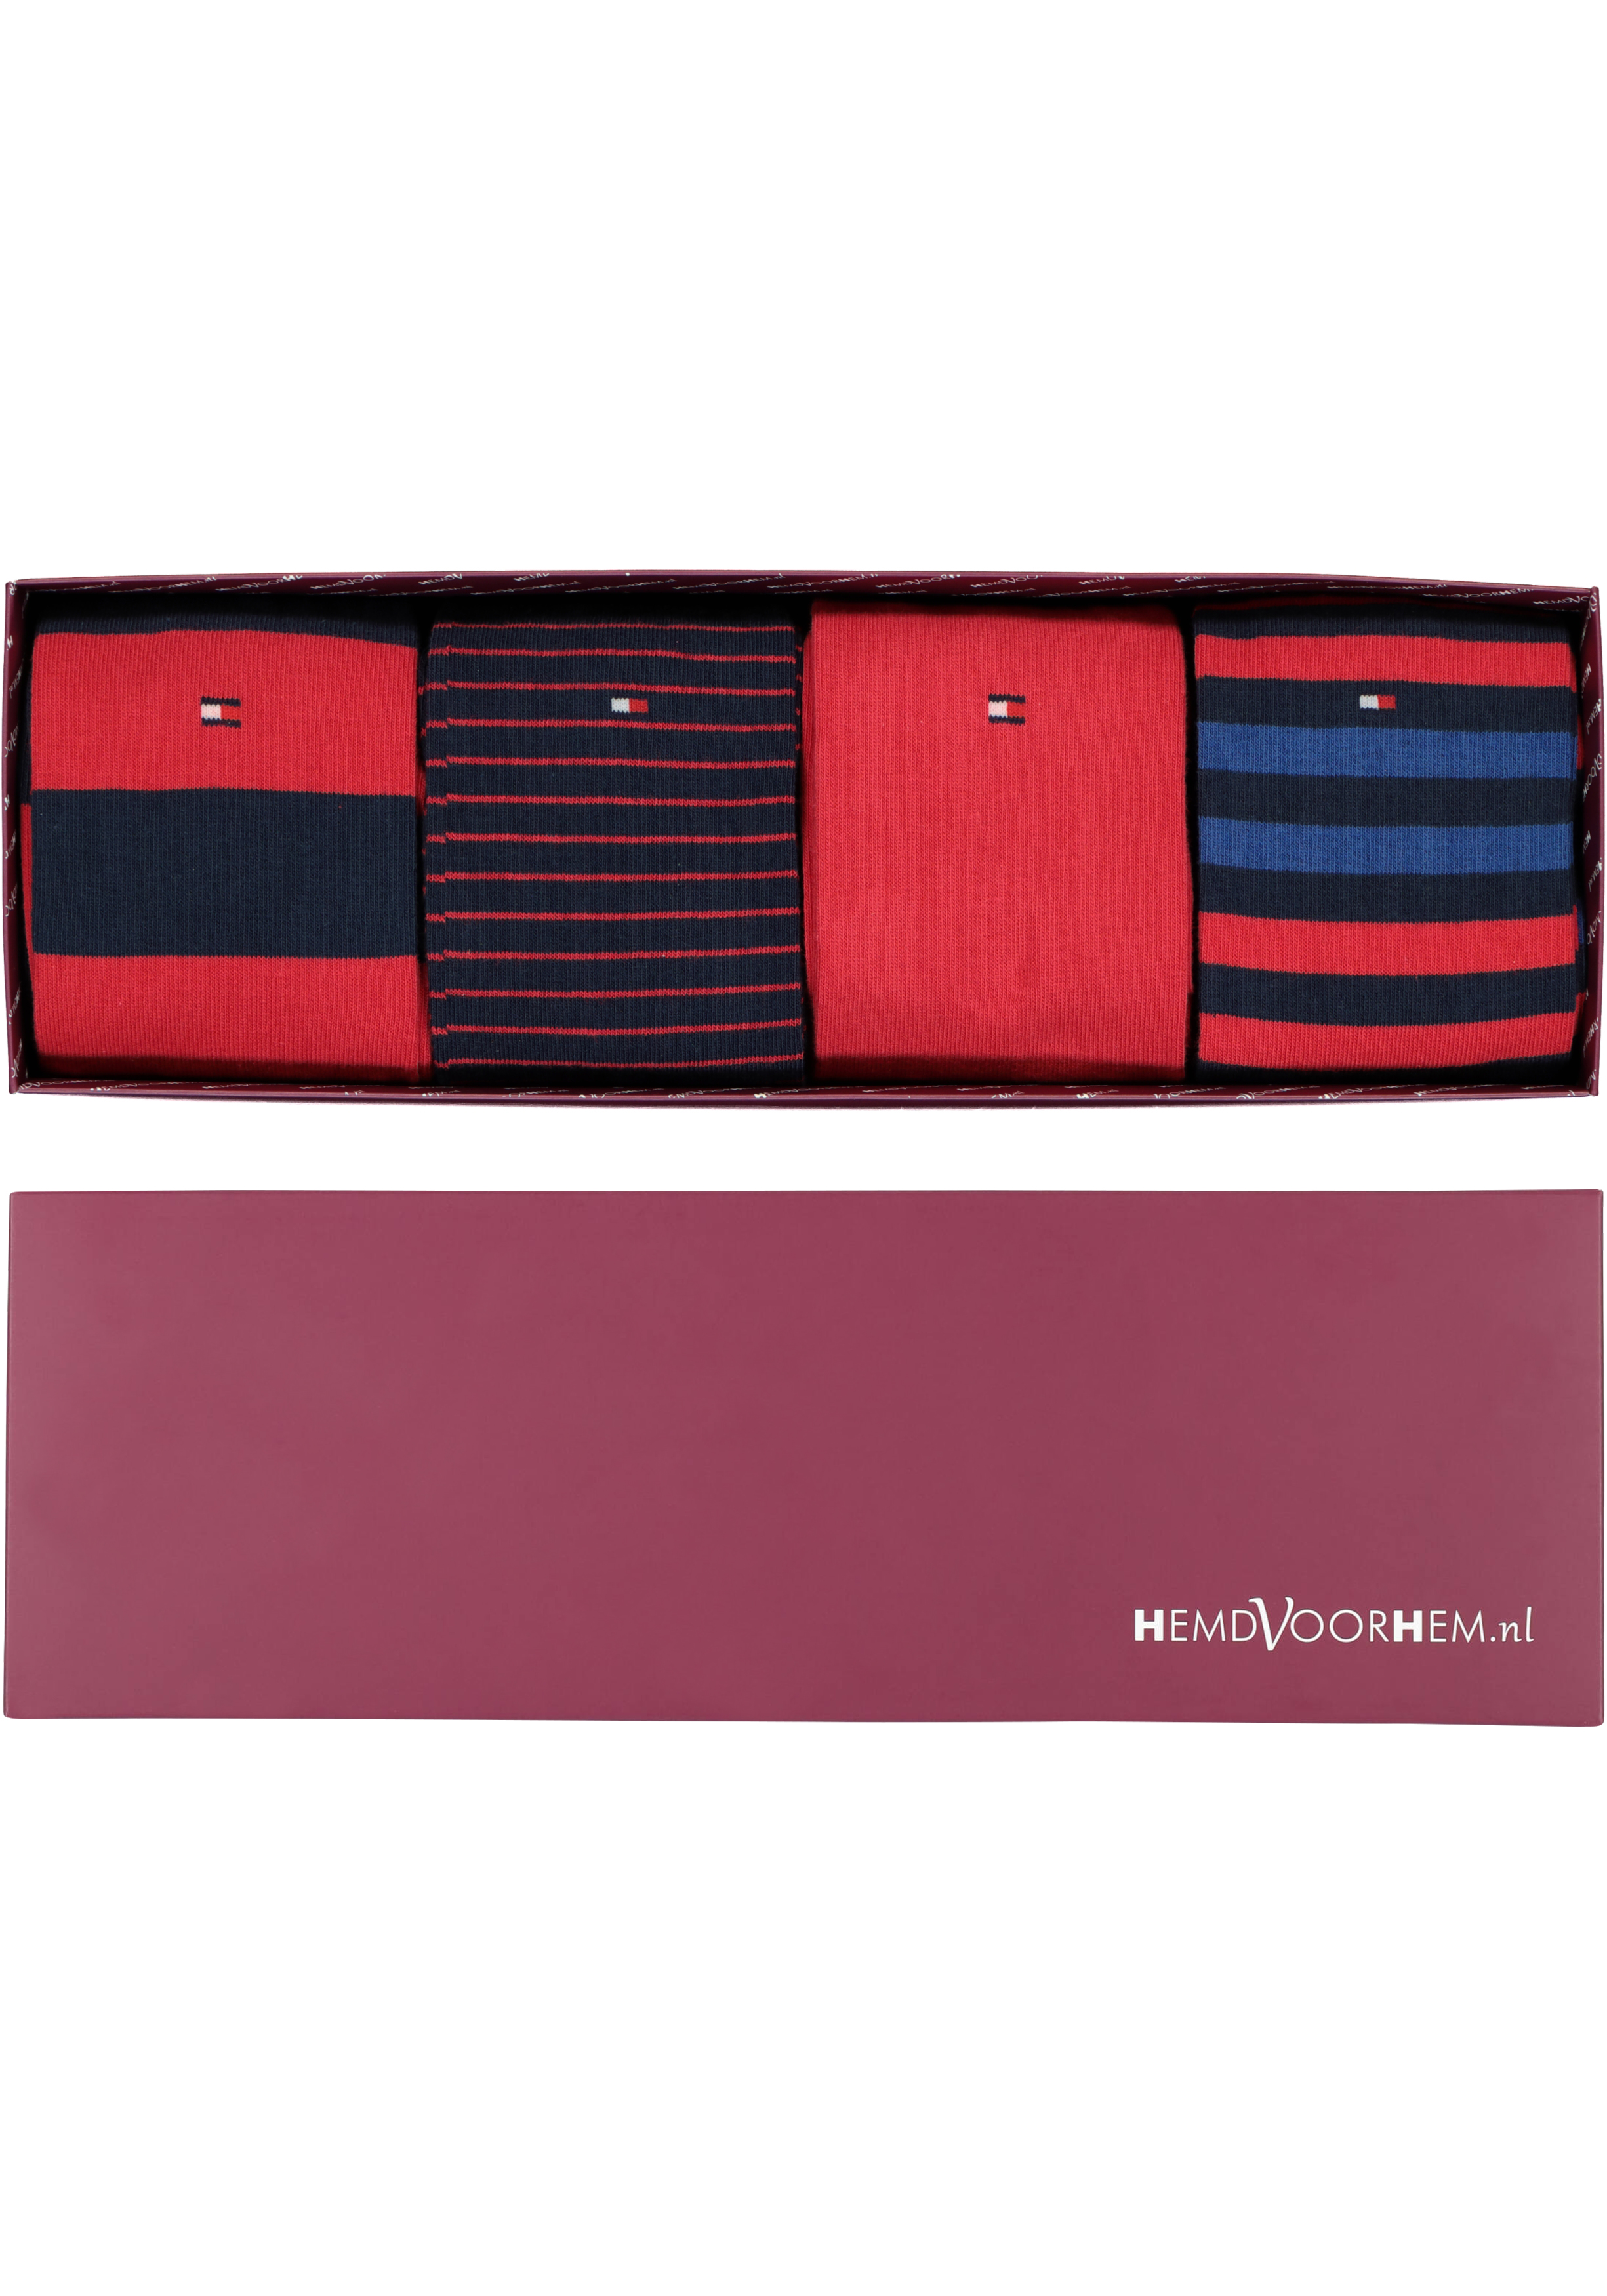 Cadeaubox Tommy With red you never feel blue Box; 8 paar Tommy Hilfiger sokken blauw en rood